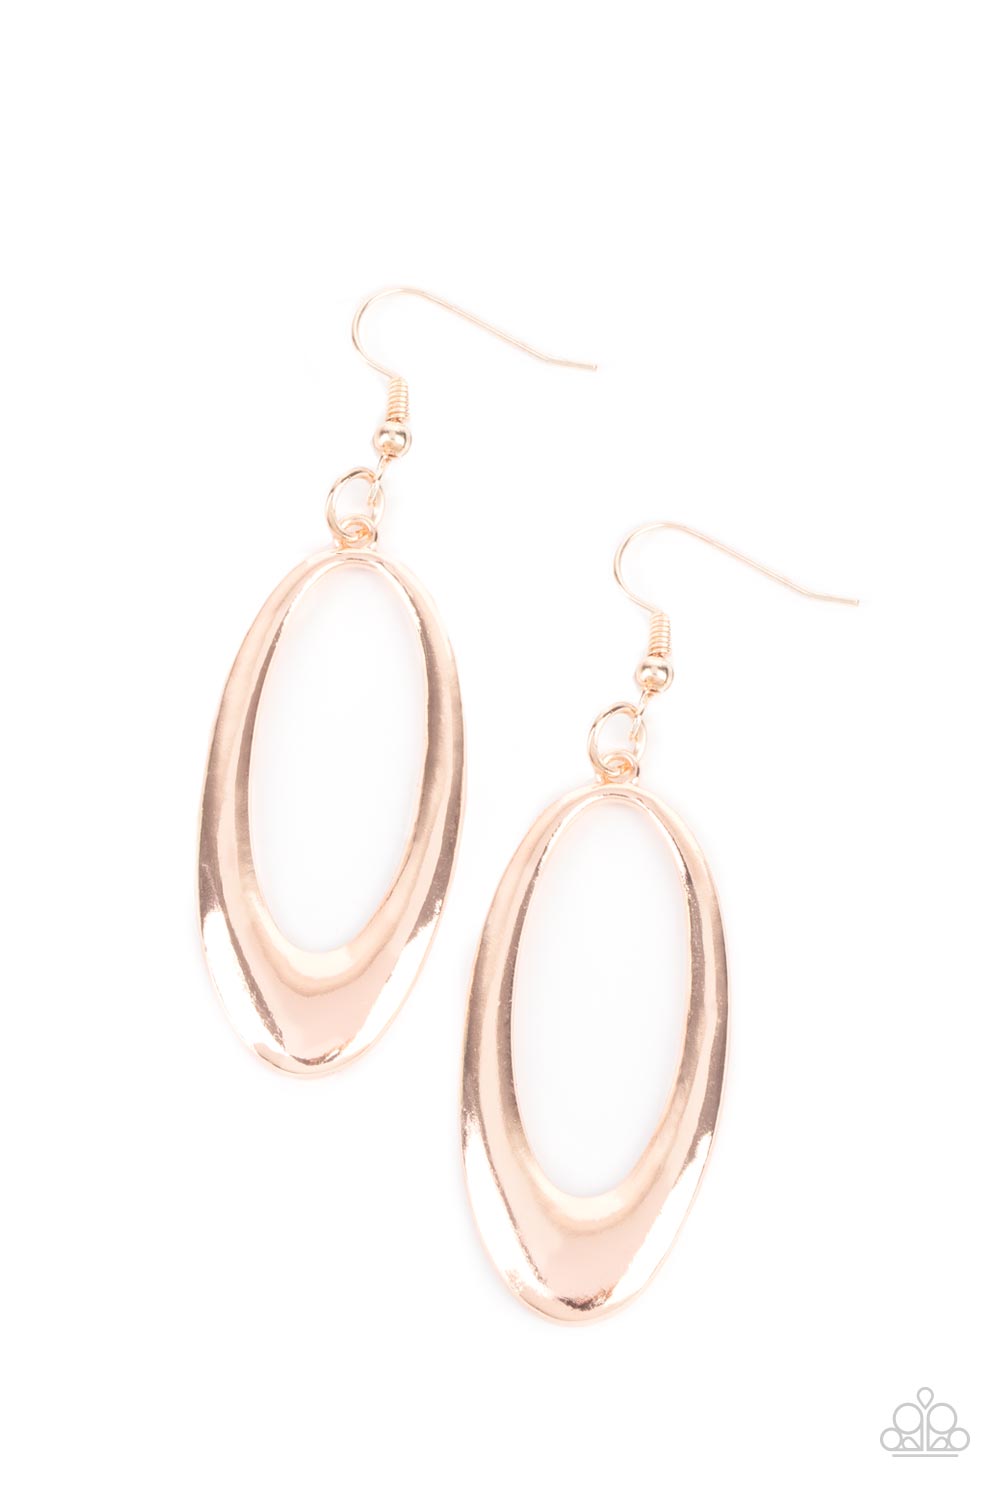 OVAL The Hill - Rose Gold